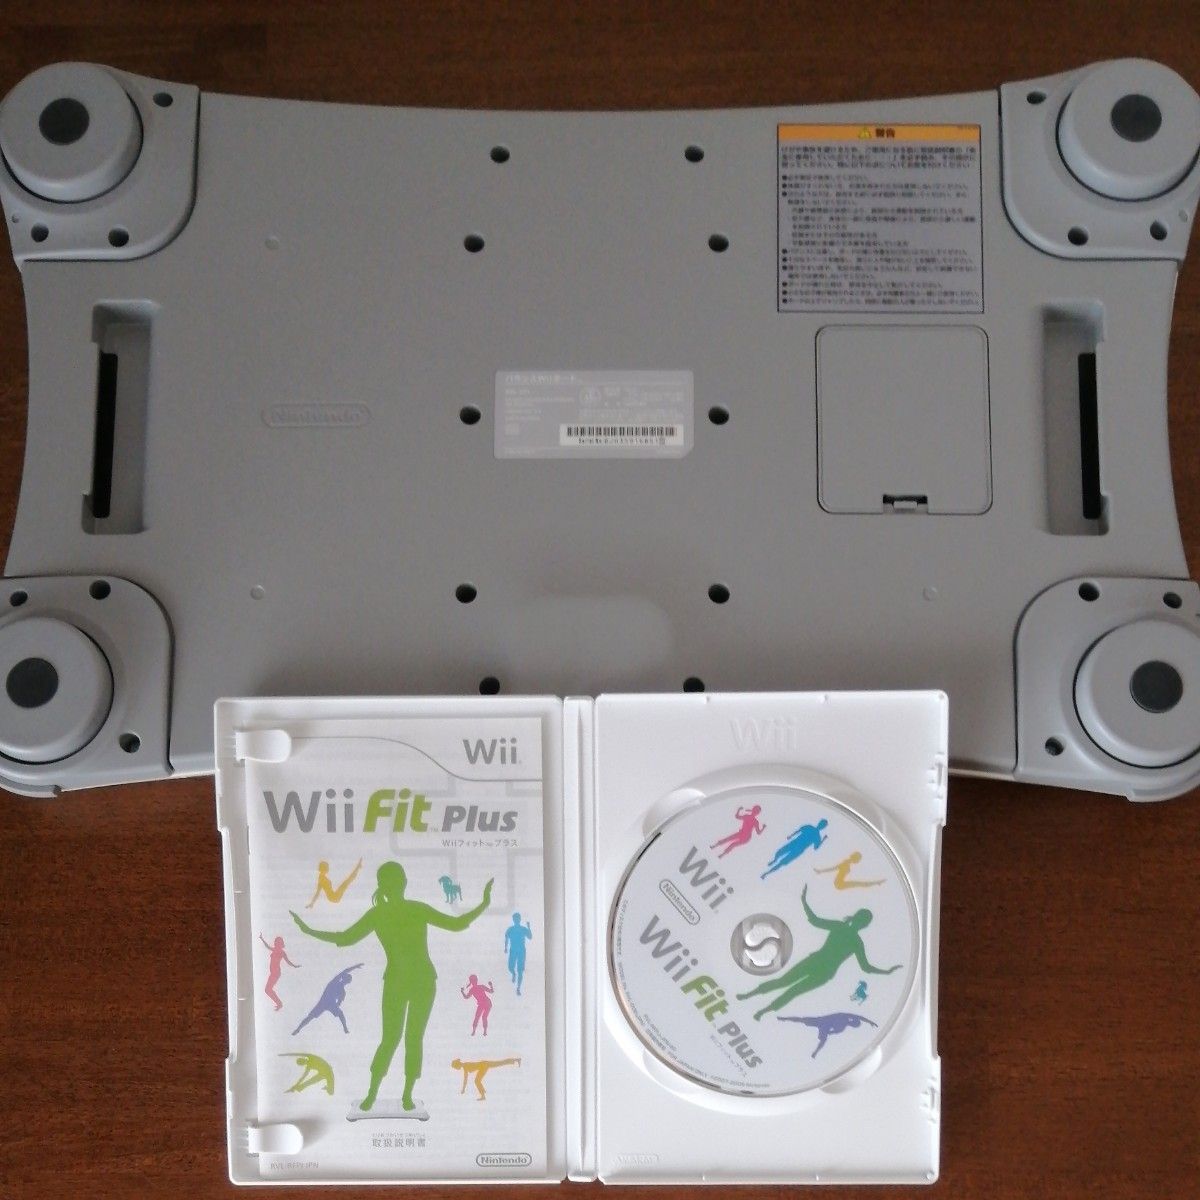 Wii本体とWii fit plusバランスボードのセット